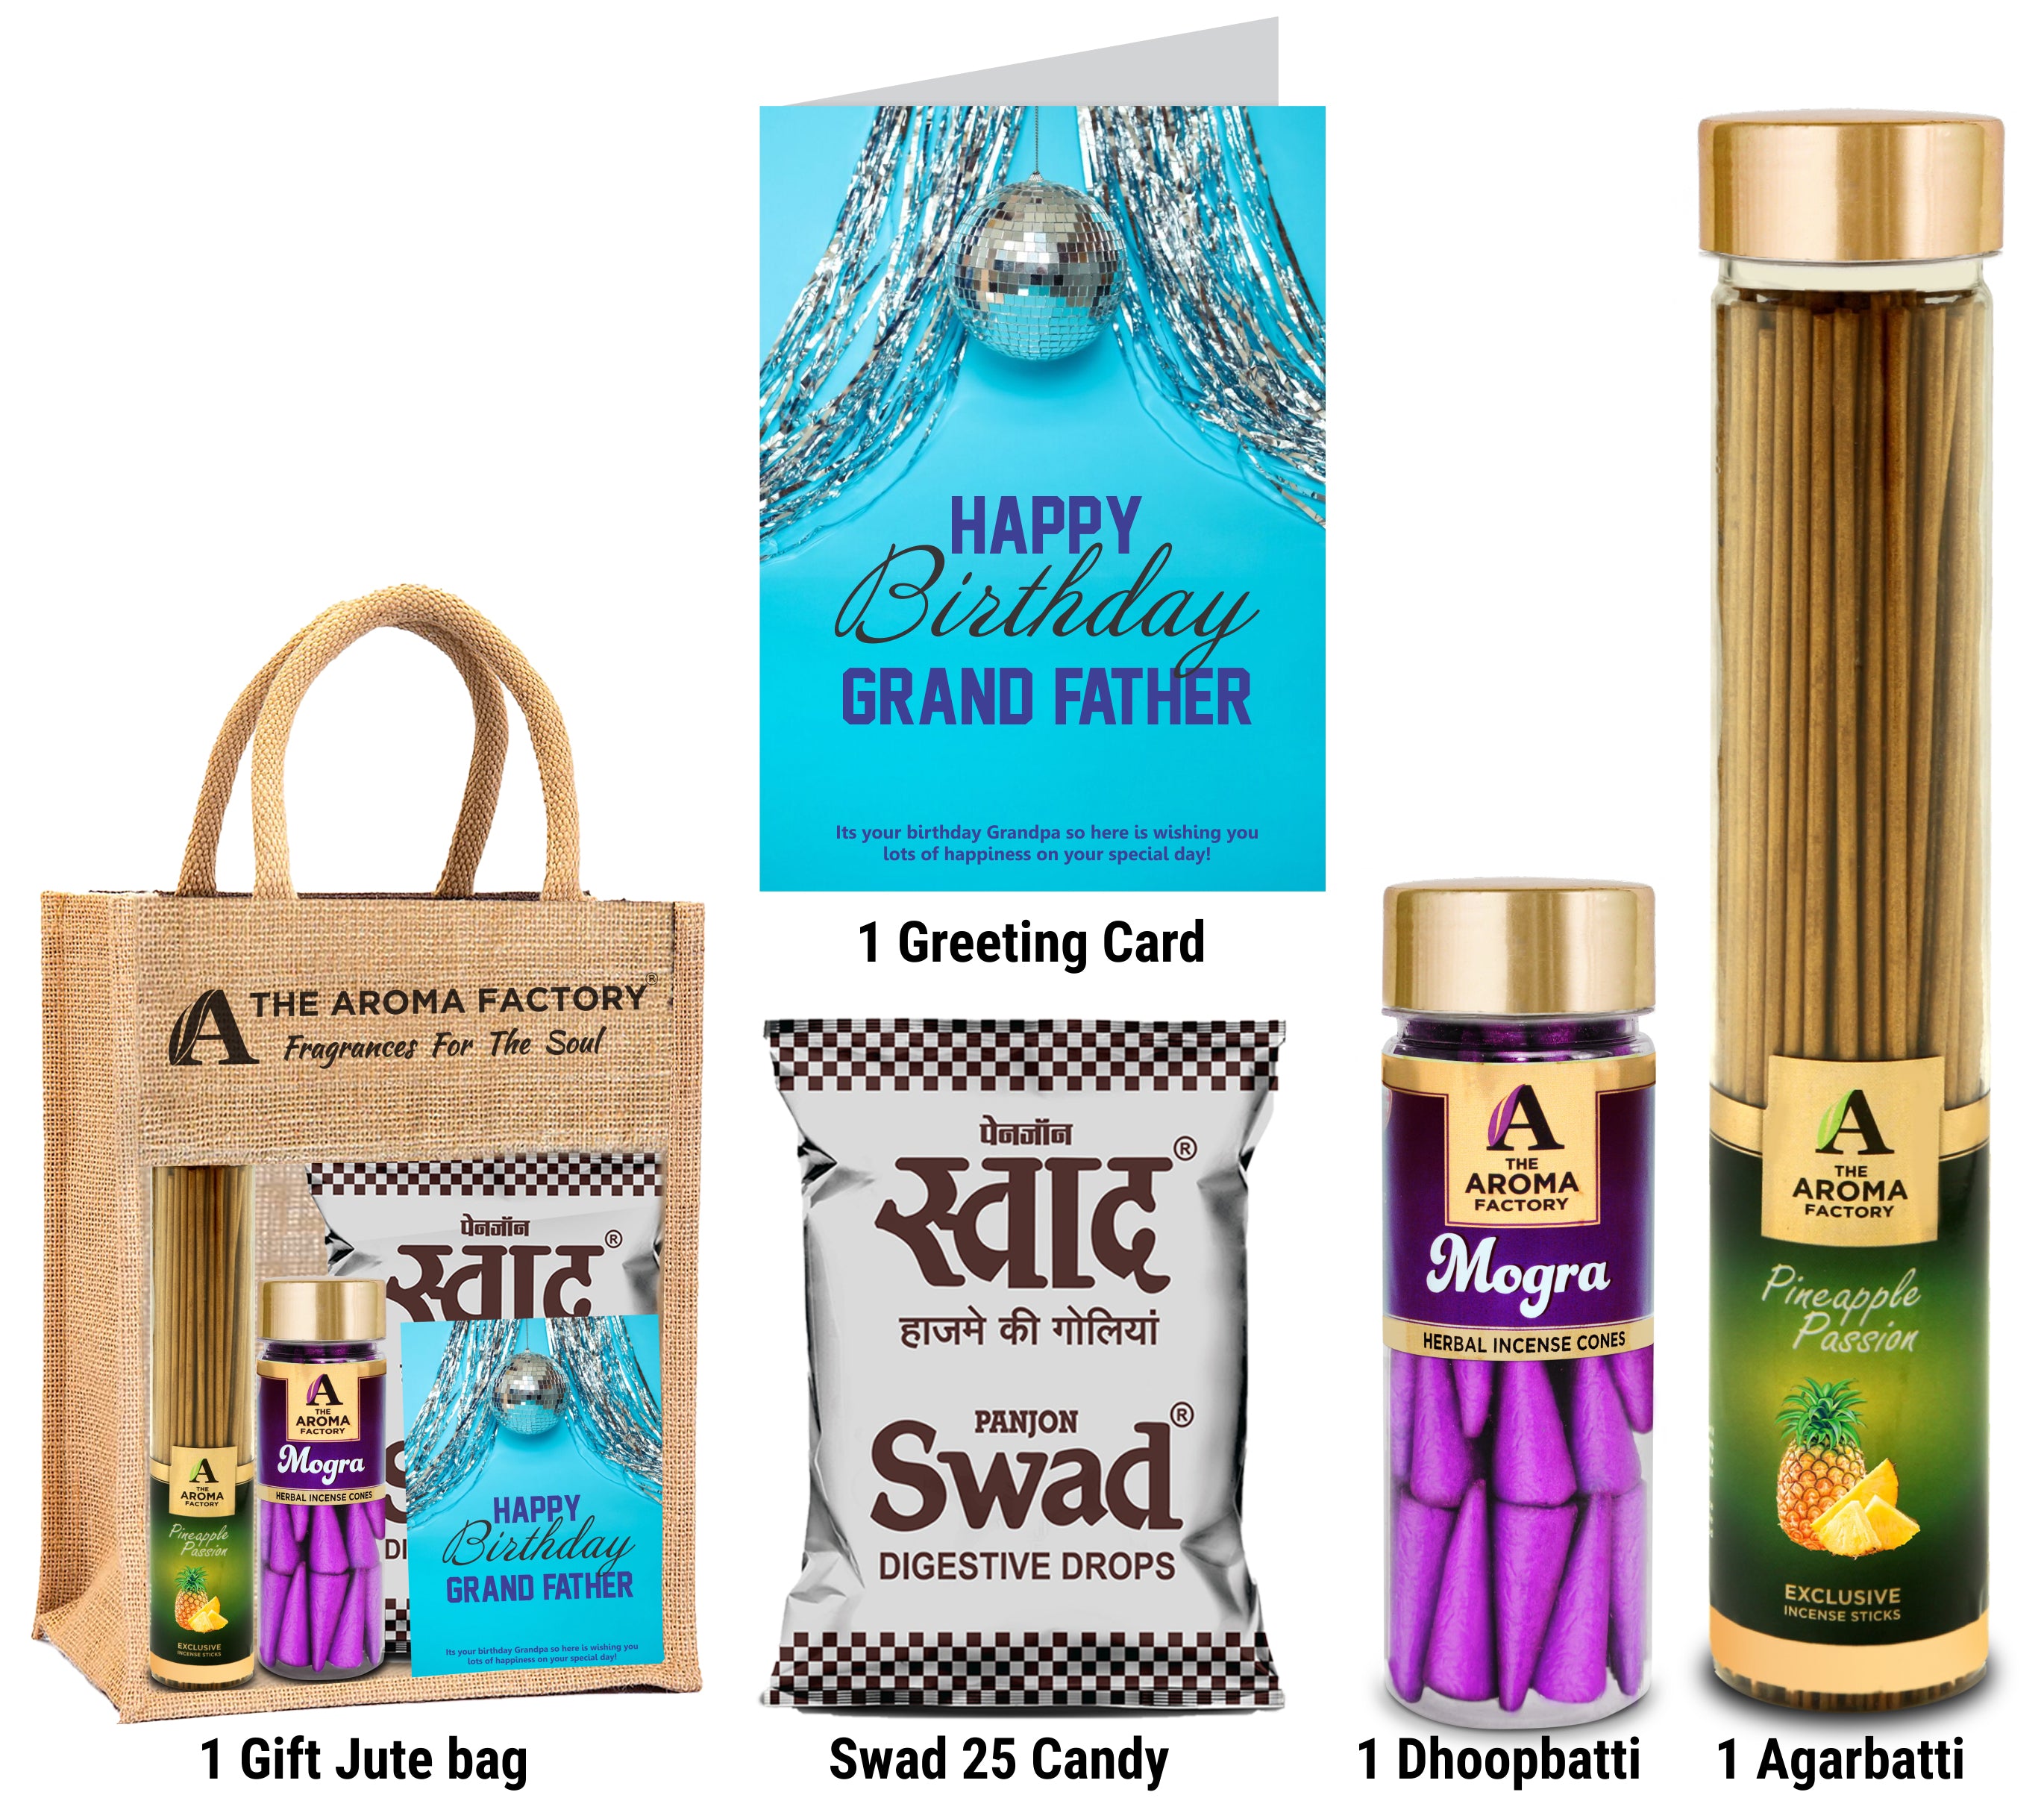 The Aroma Factory Happy Birthday Dada Grand Dad Gift with Card (25 Swad Candy, Pineapple Agarbatti Bottle, Mogra Cone) in Jute Bag